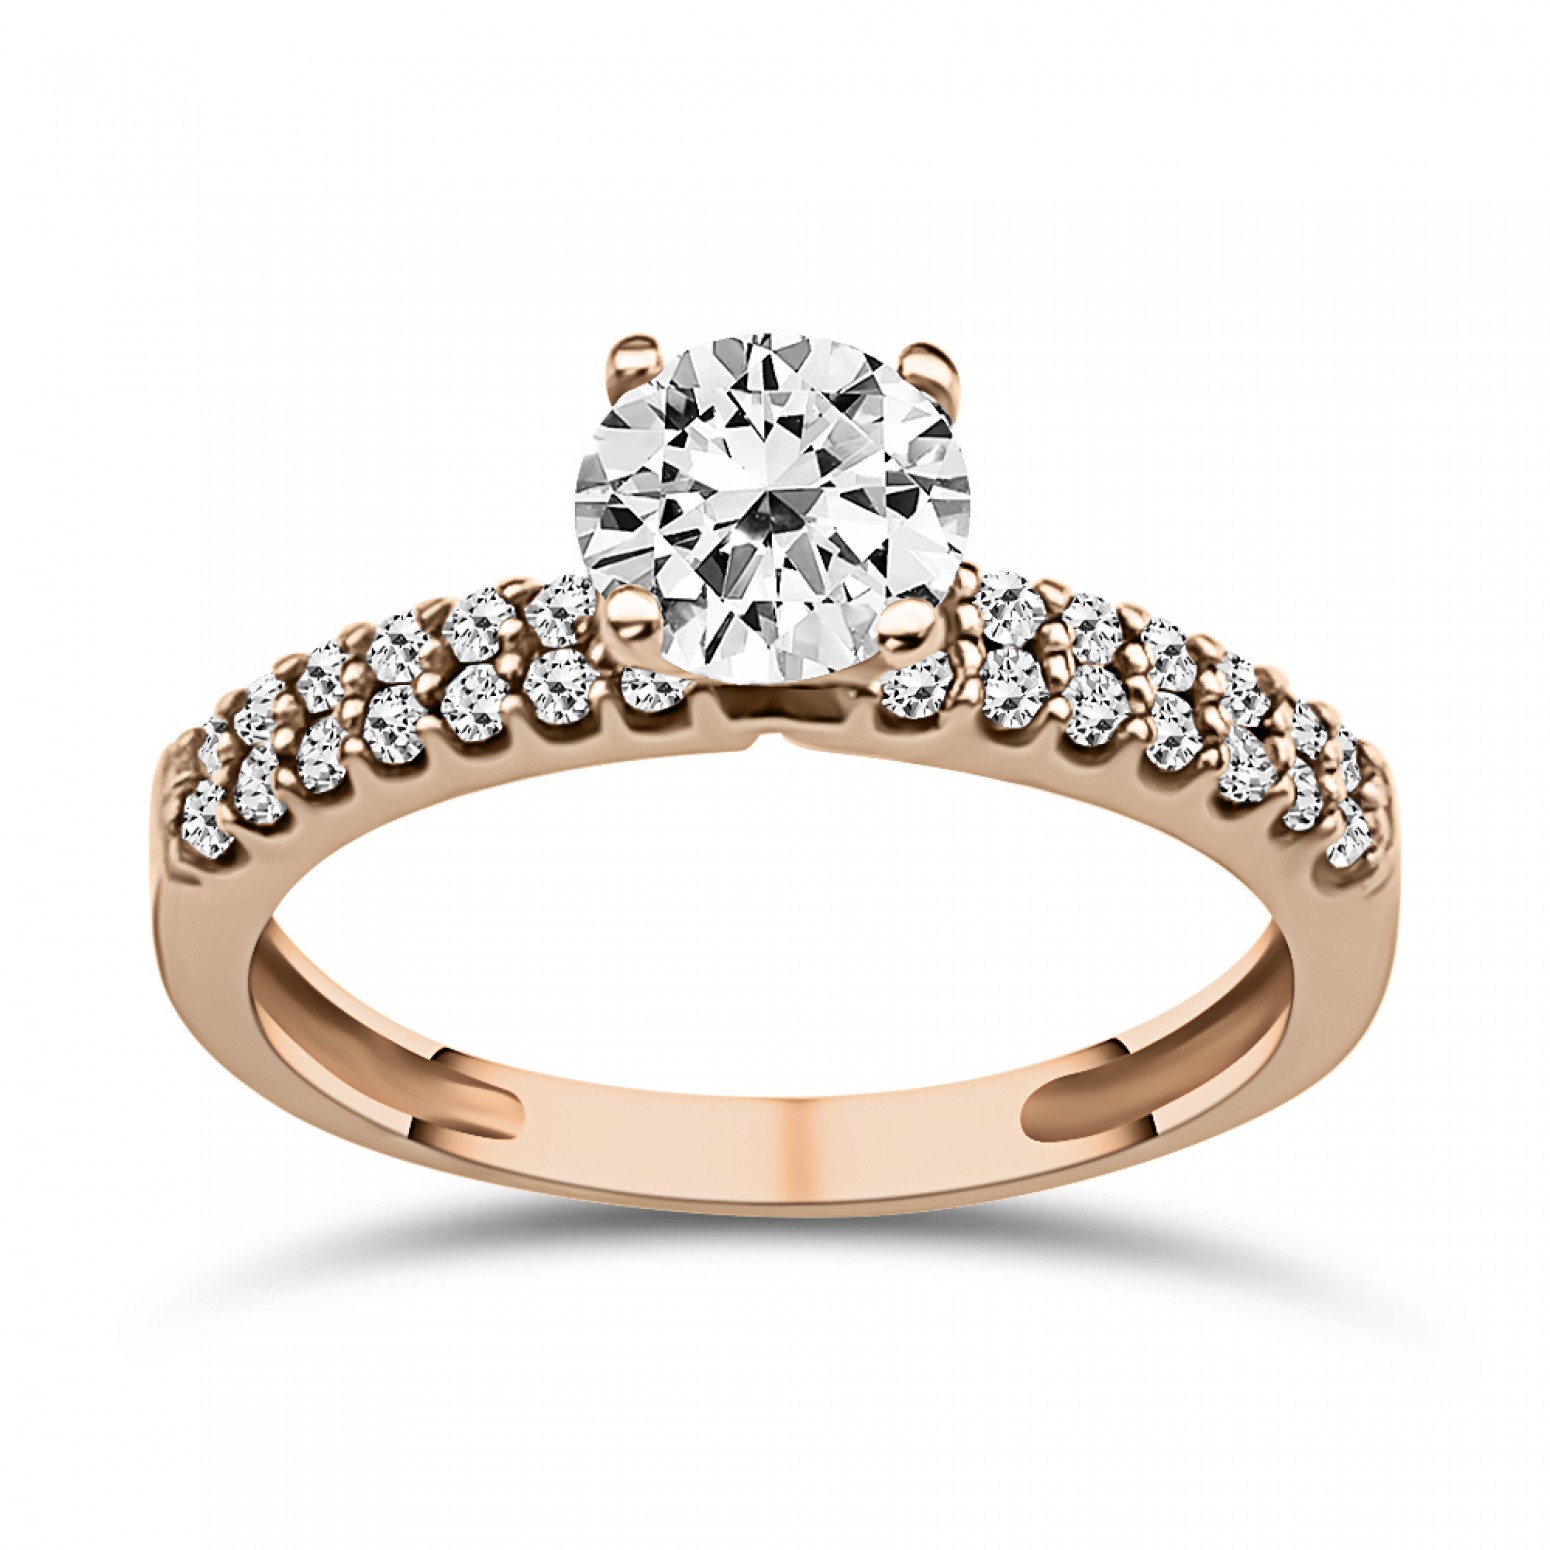 Solitaire ring 14K pink gold with zircon, da3814 ENGAGEMENT RINGS Κοσμηματα - chrilia.gr